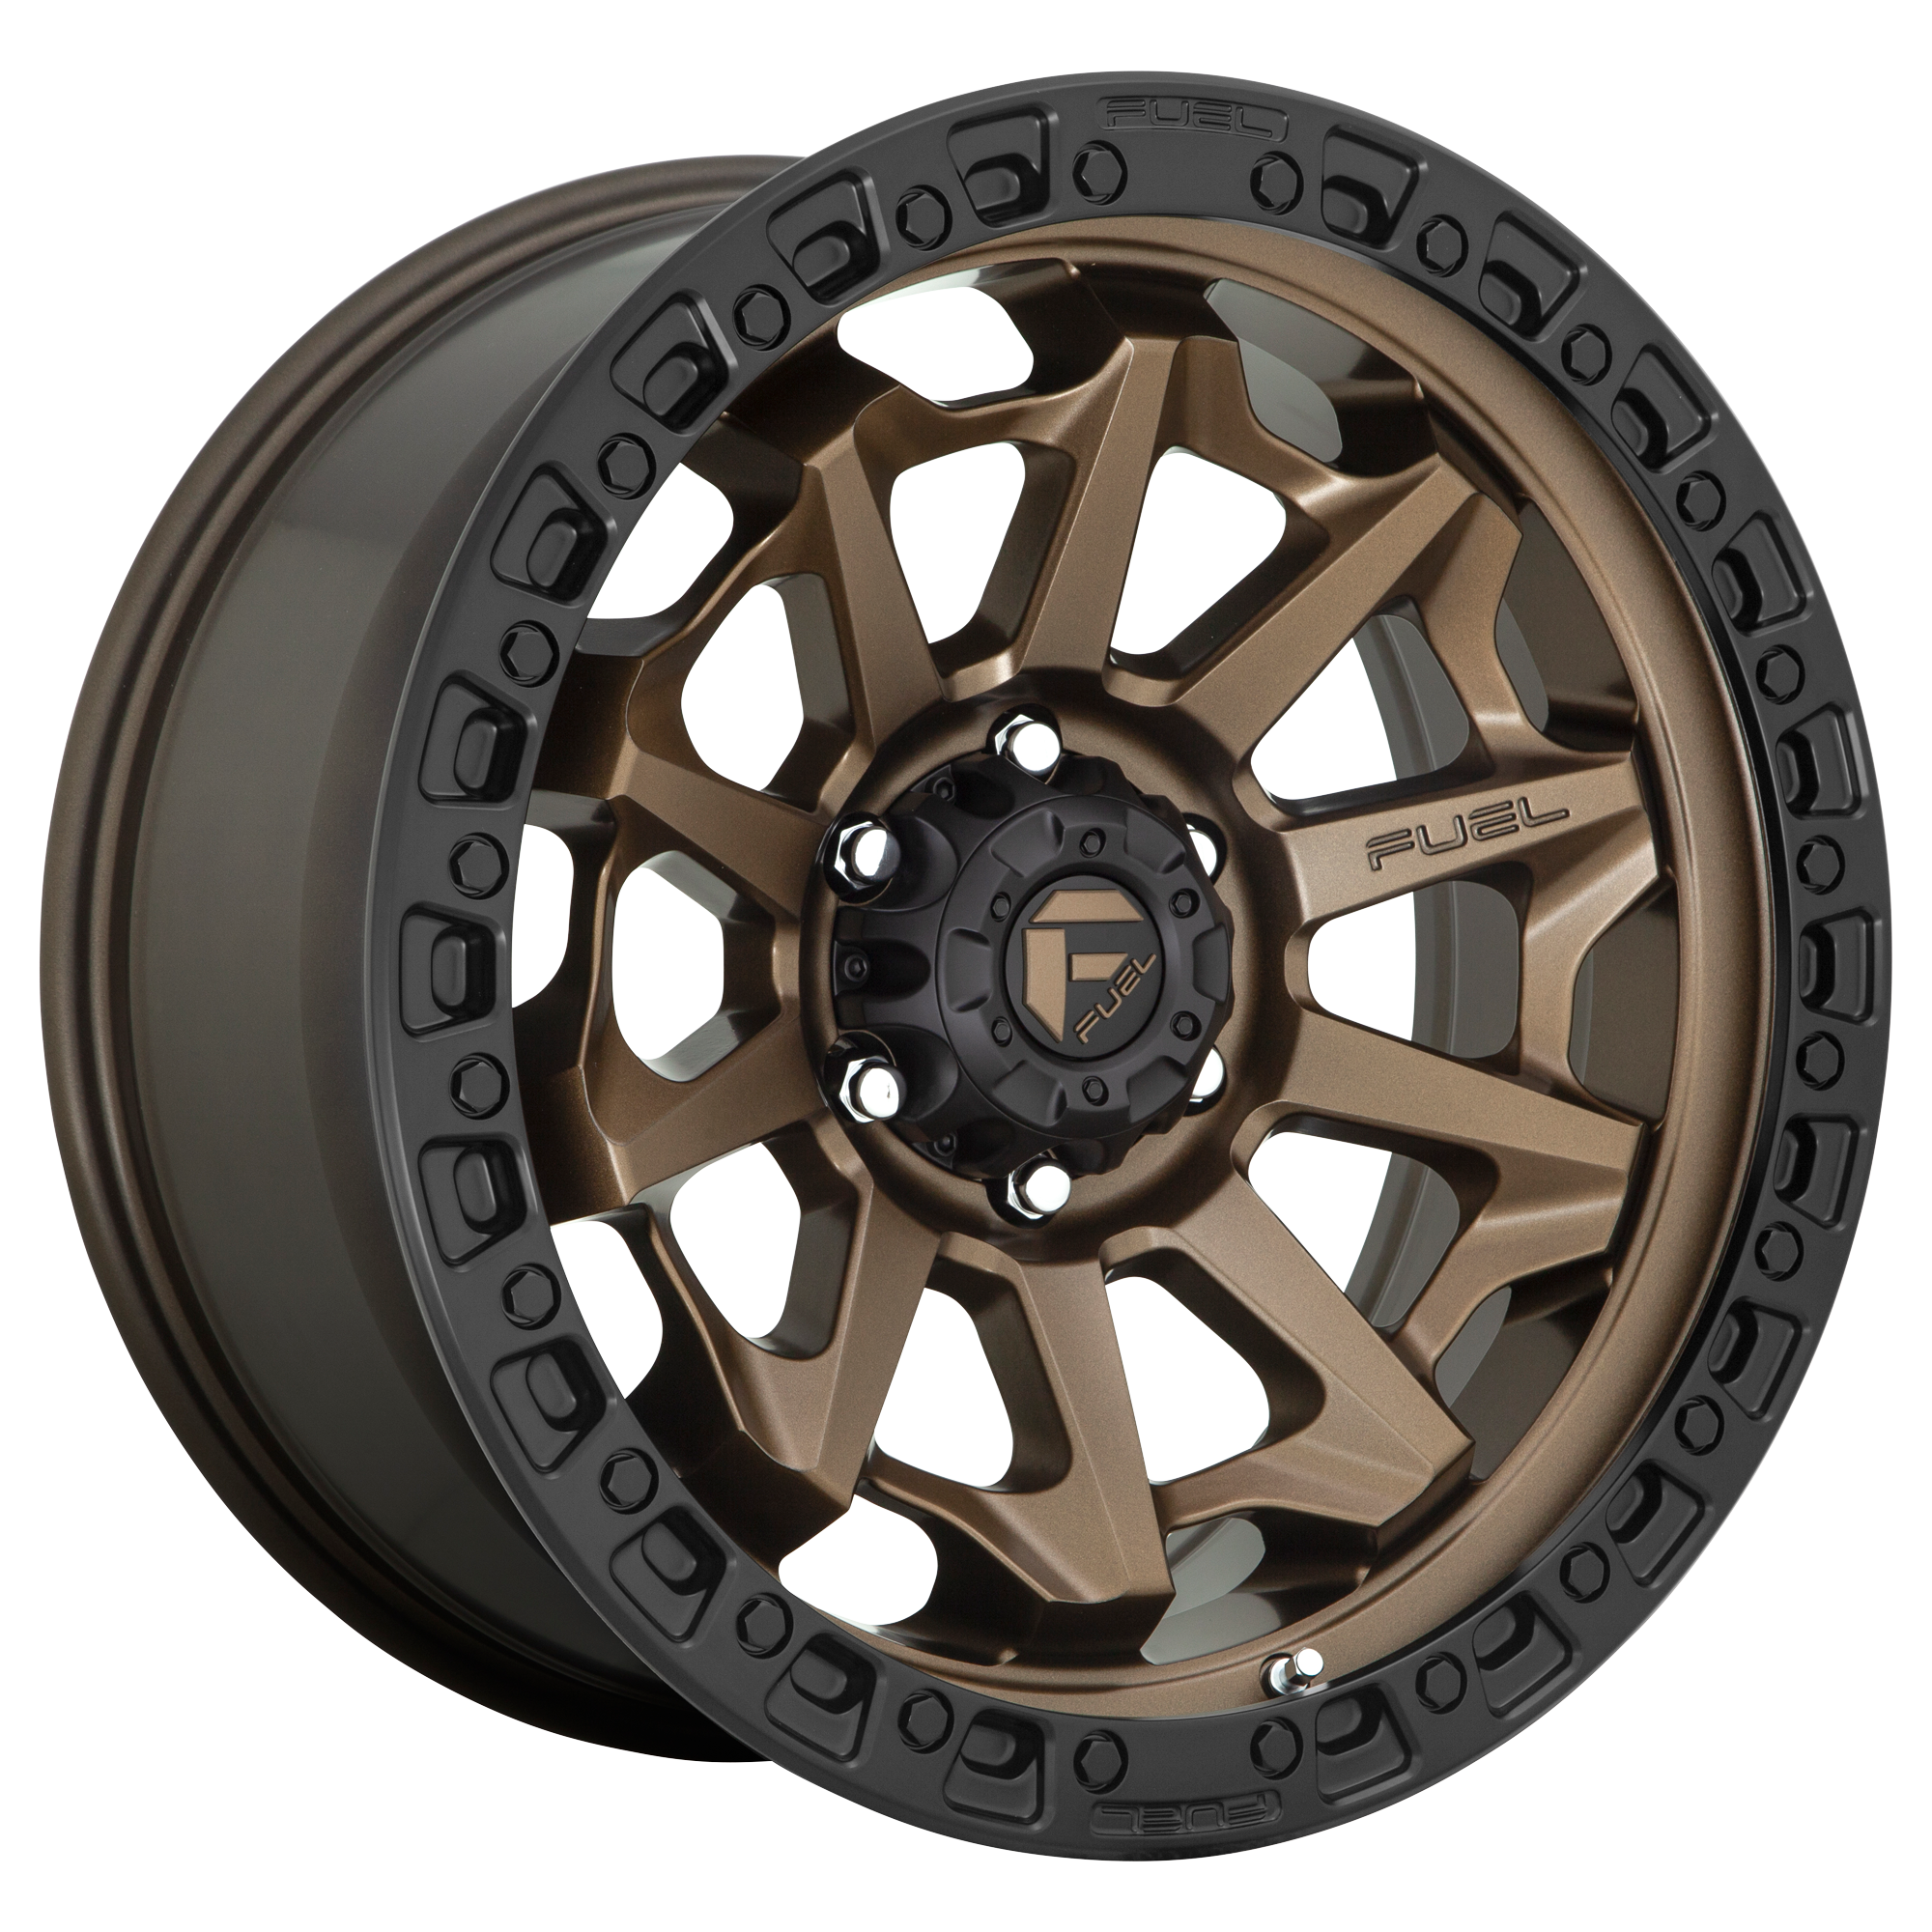 COVERT 18x9 6x135.00 MATTE BRONZE BLACK BEAD RING (-12 mm) - Tires and Engine Performance